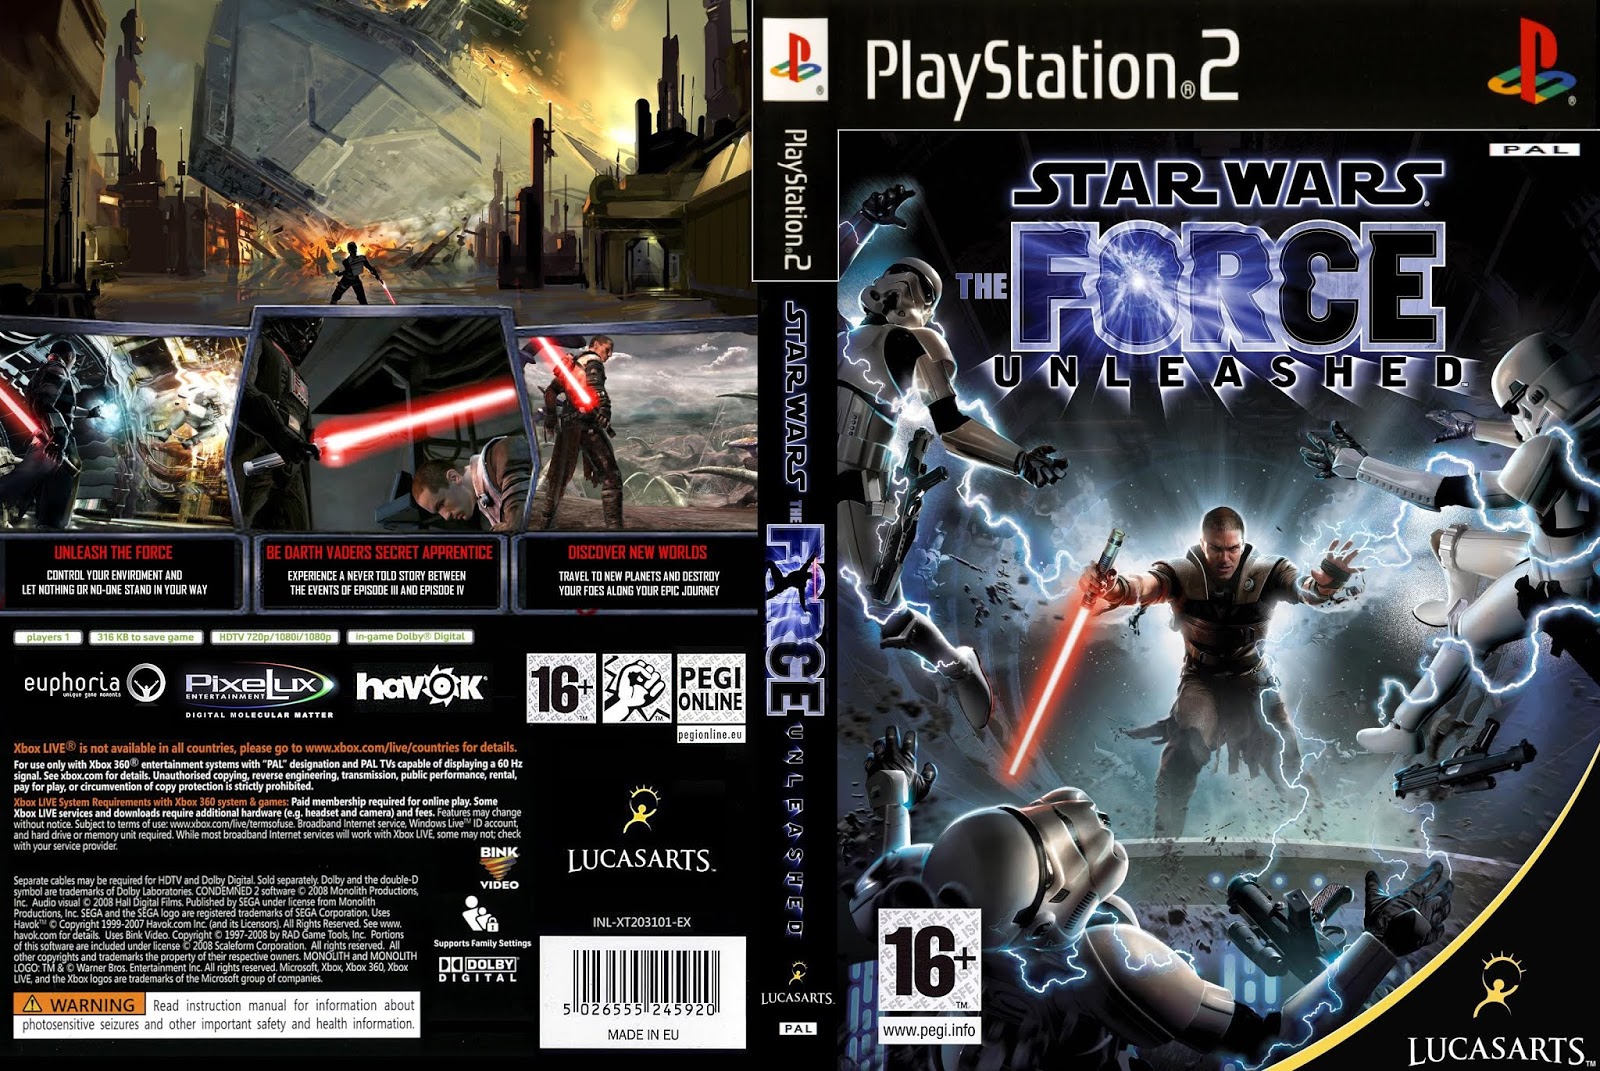 Replicate face to many ps2. Star Wars the Force unleashed ps2. Star Wars: the Force unleashed пс2. Star Wars the forse unlashed ps2. Диск ps3 Star Wars the Force unleashed.